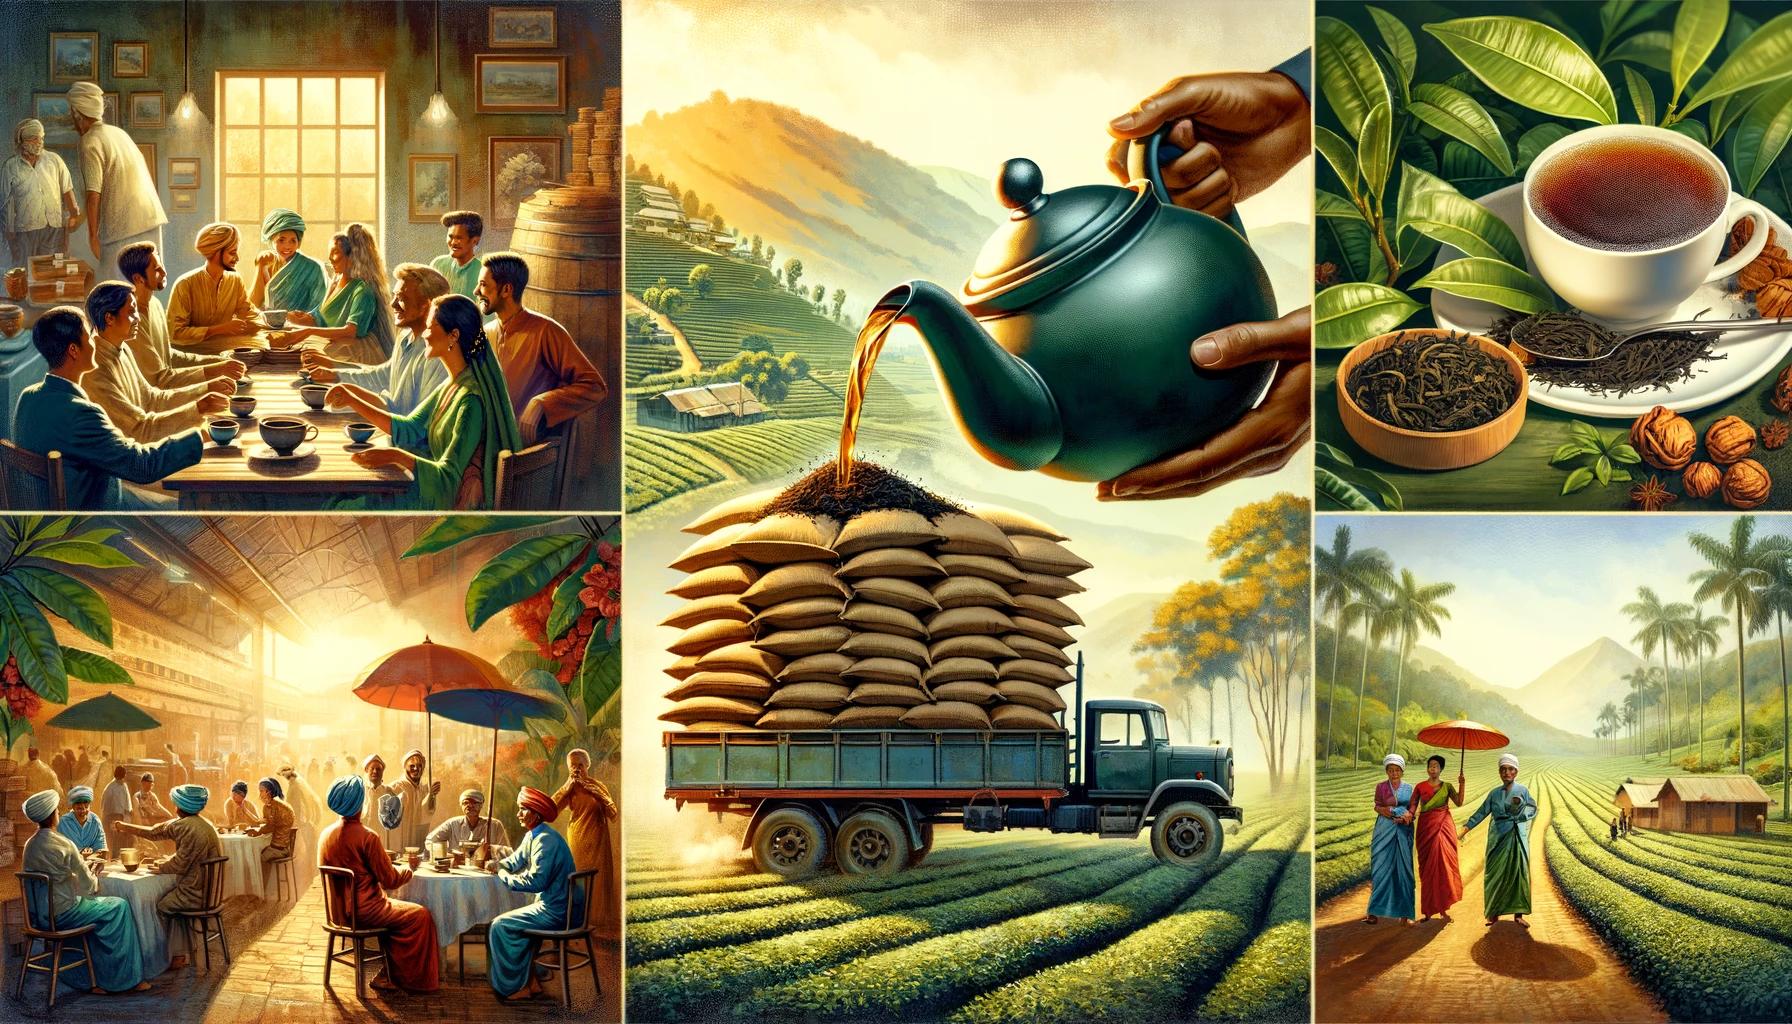 Here is the image illustrating the significance of tea, featuring a collage of a teapot pouring tea, a tea gathering, and a tea trade scene, all set against the backdrop of tea plantations. 